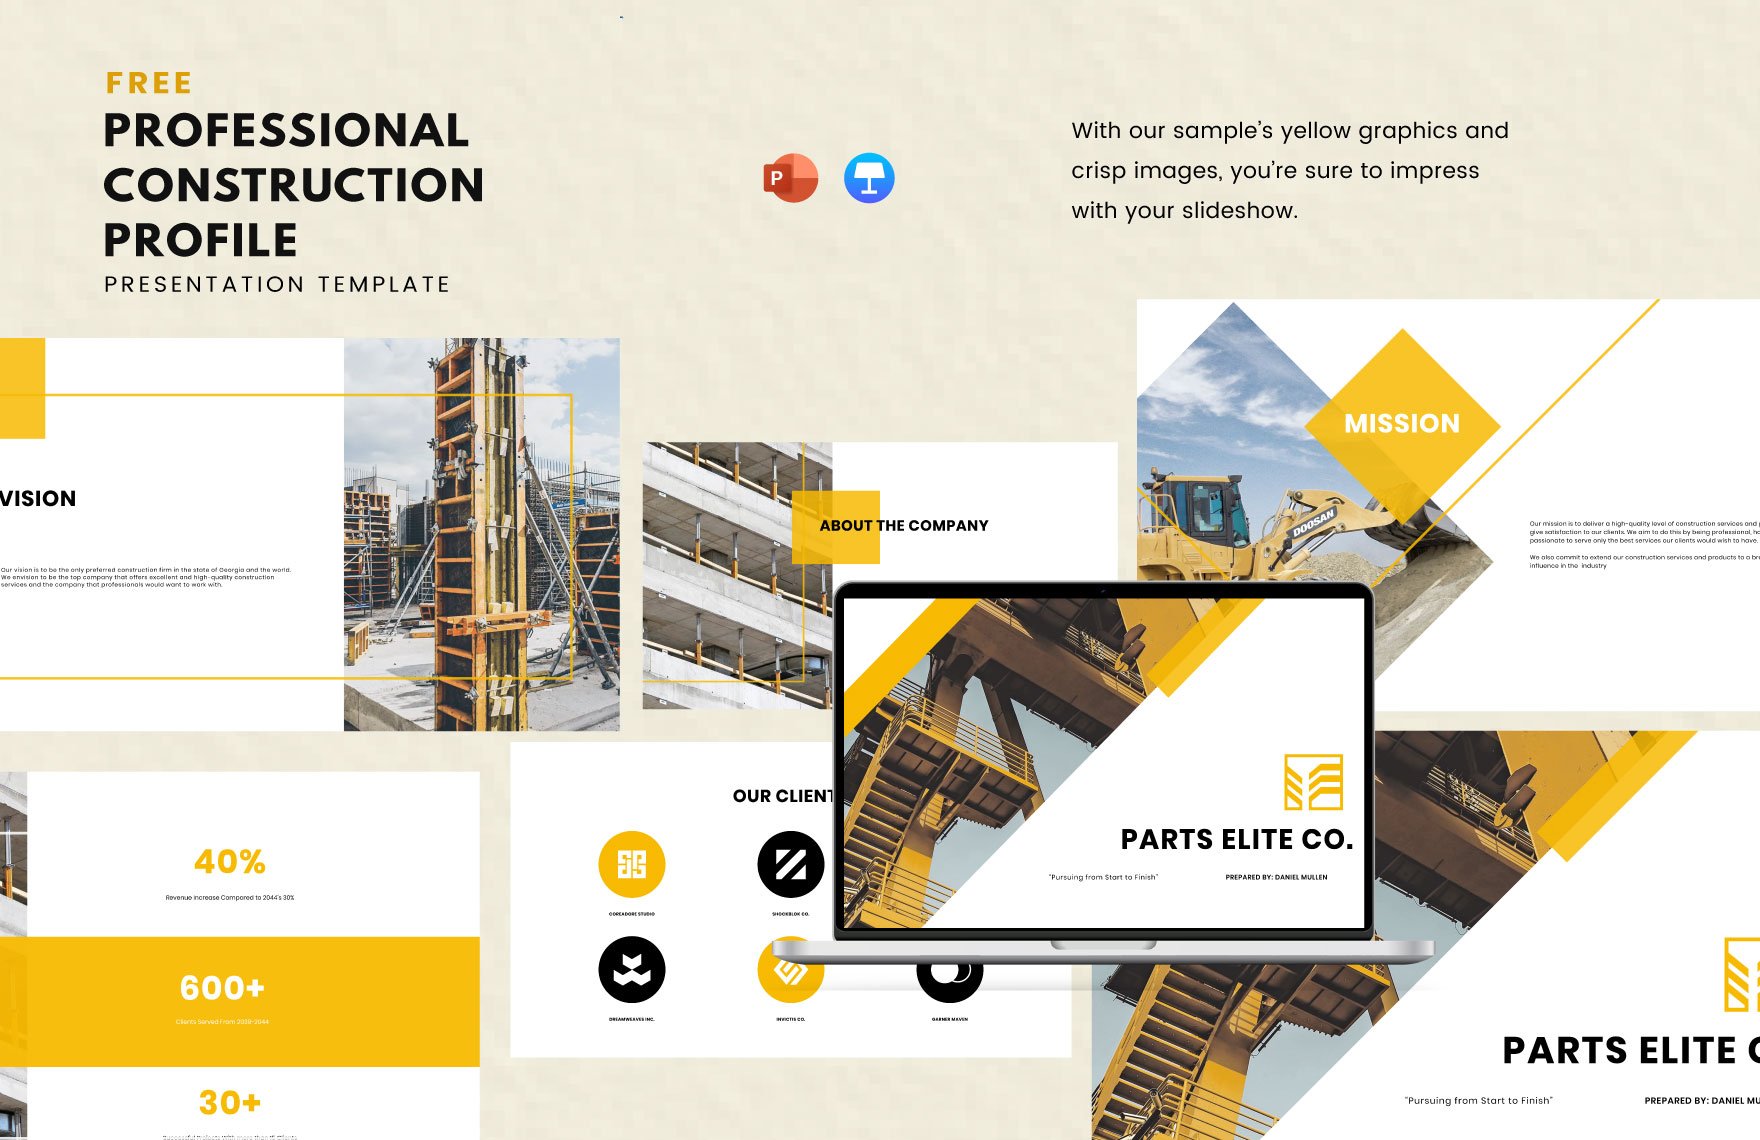 Free Professional Construction Profile Template